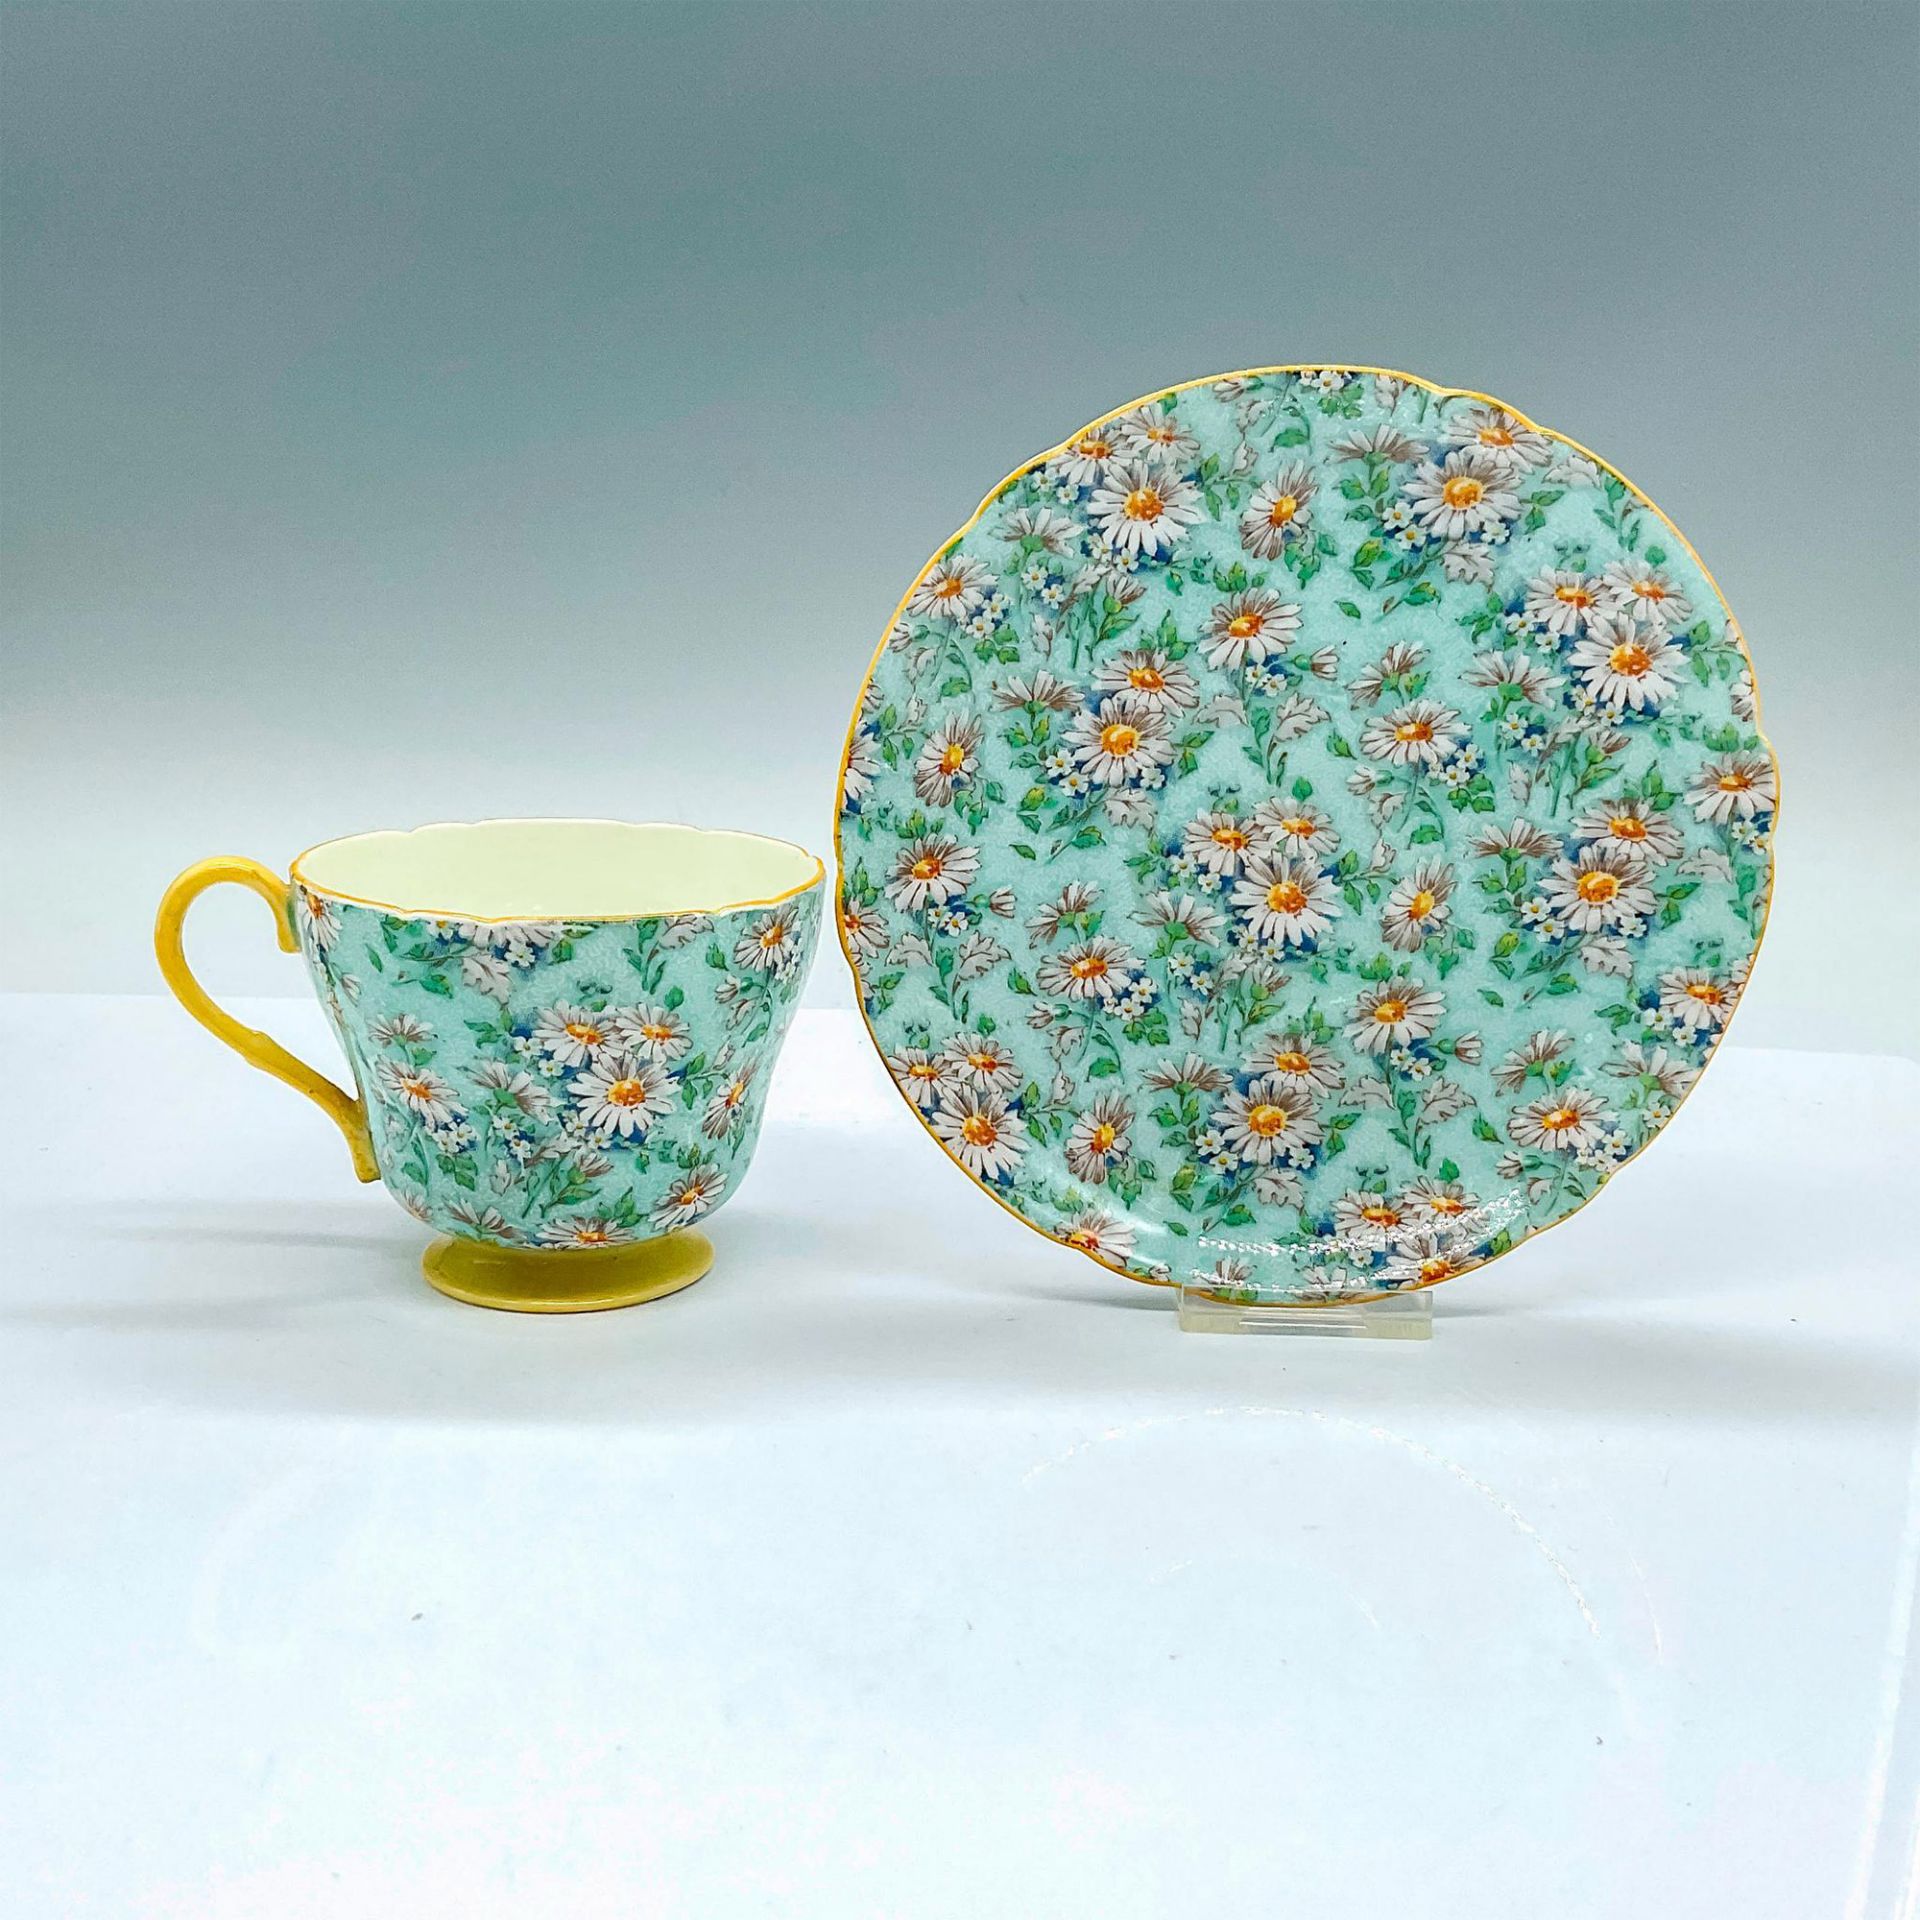 2pc Shelley China Teacup and Saucer, Marguerite - Image 2 of 3